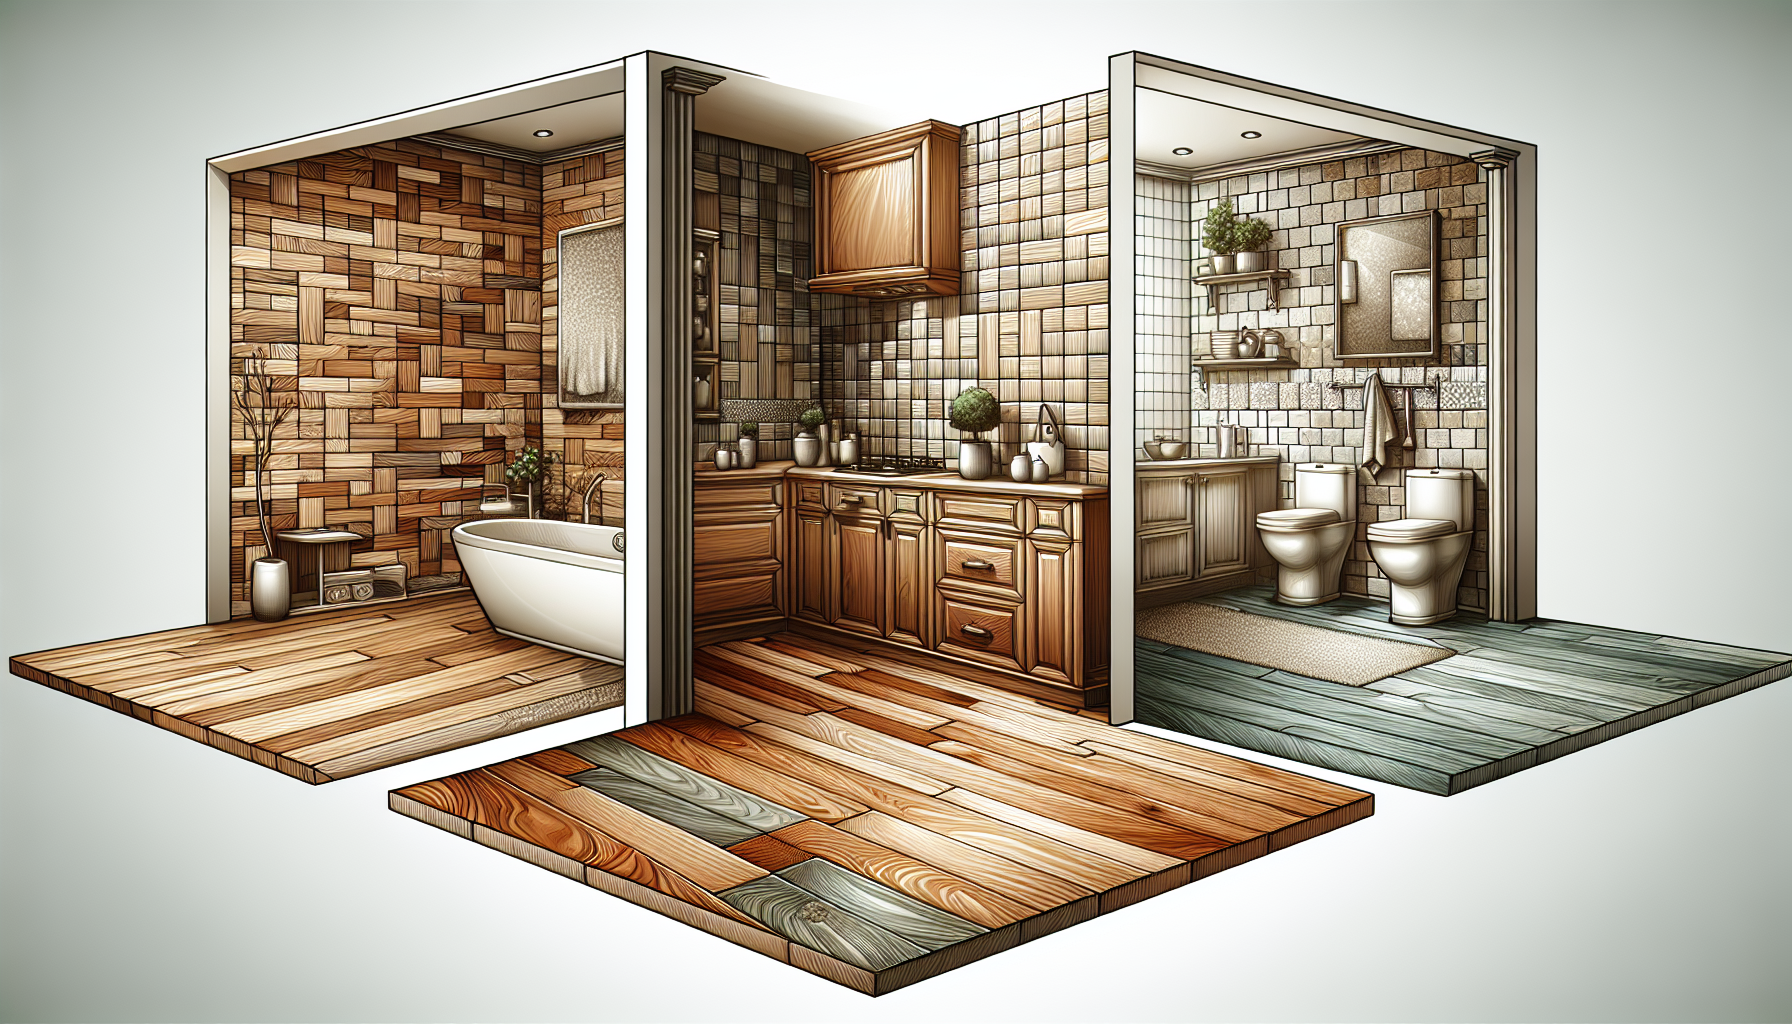 Ideal uses for wood tile